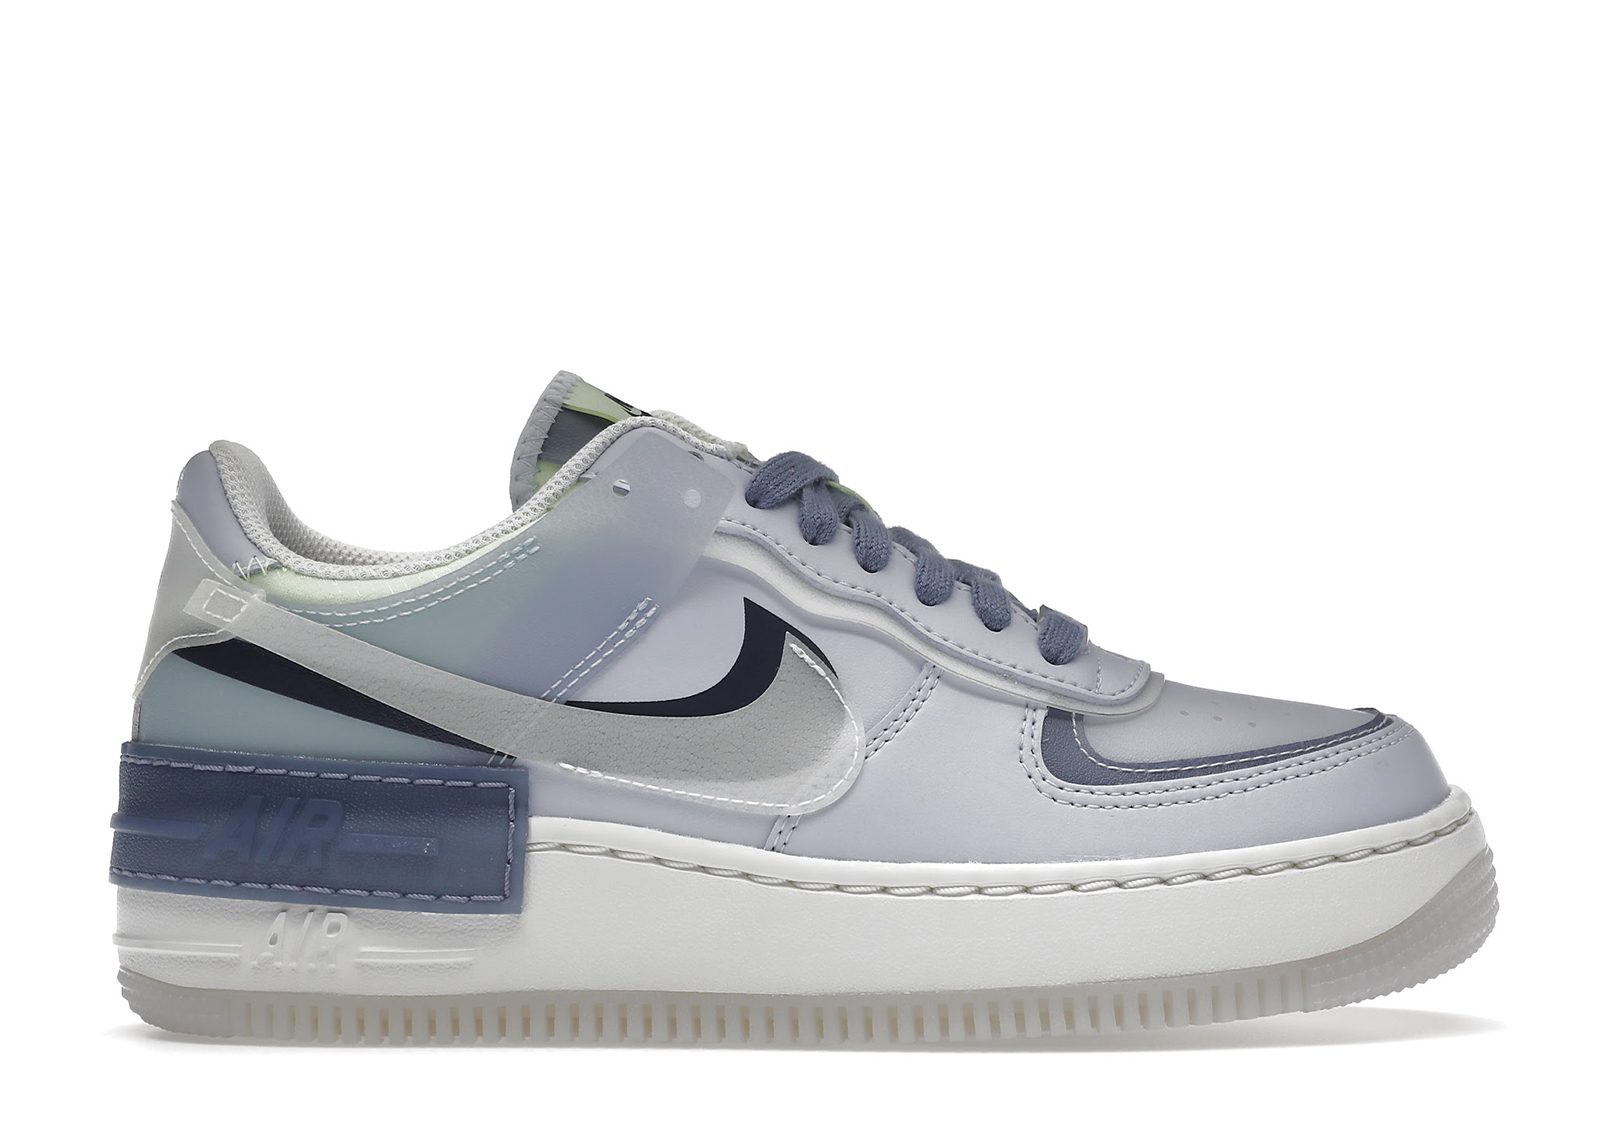 Nike Air Force 1 Low Shadow Sail Light Silver Citron Tint (Women's 